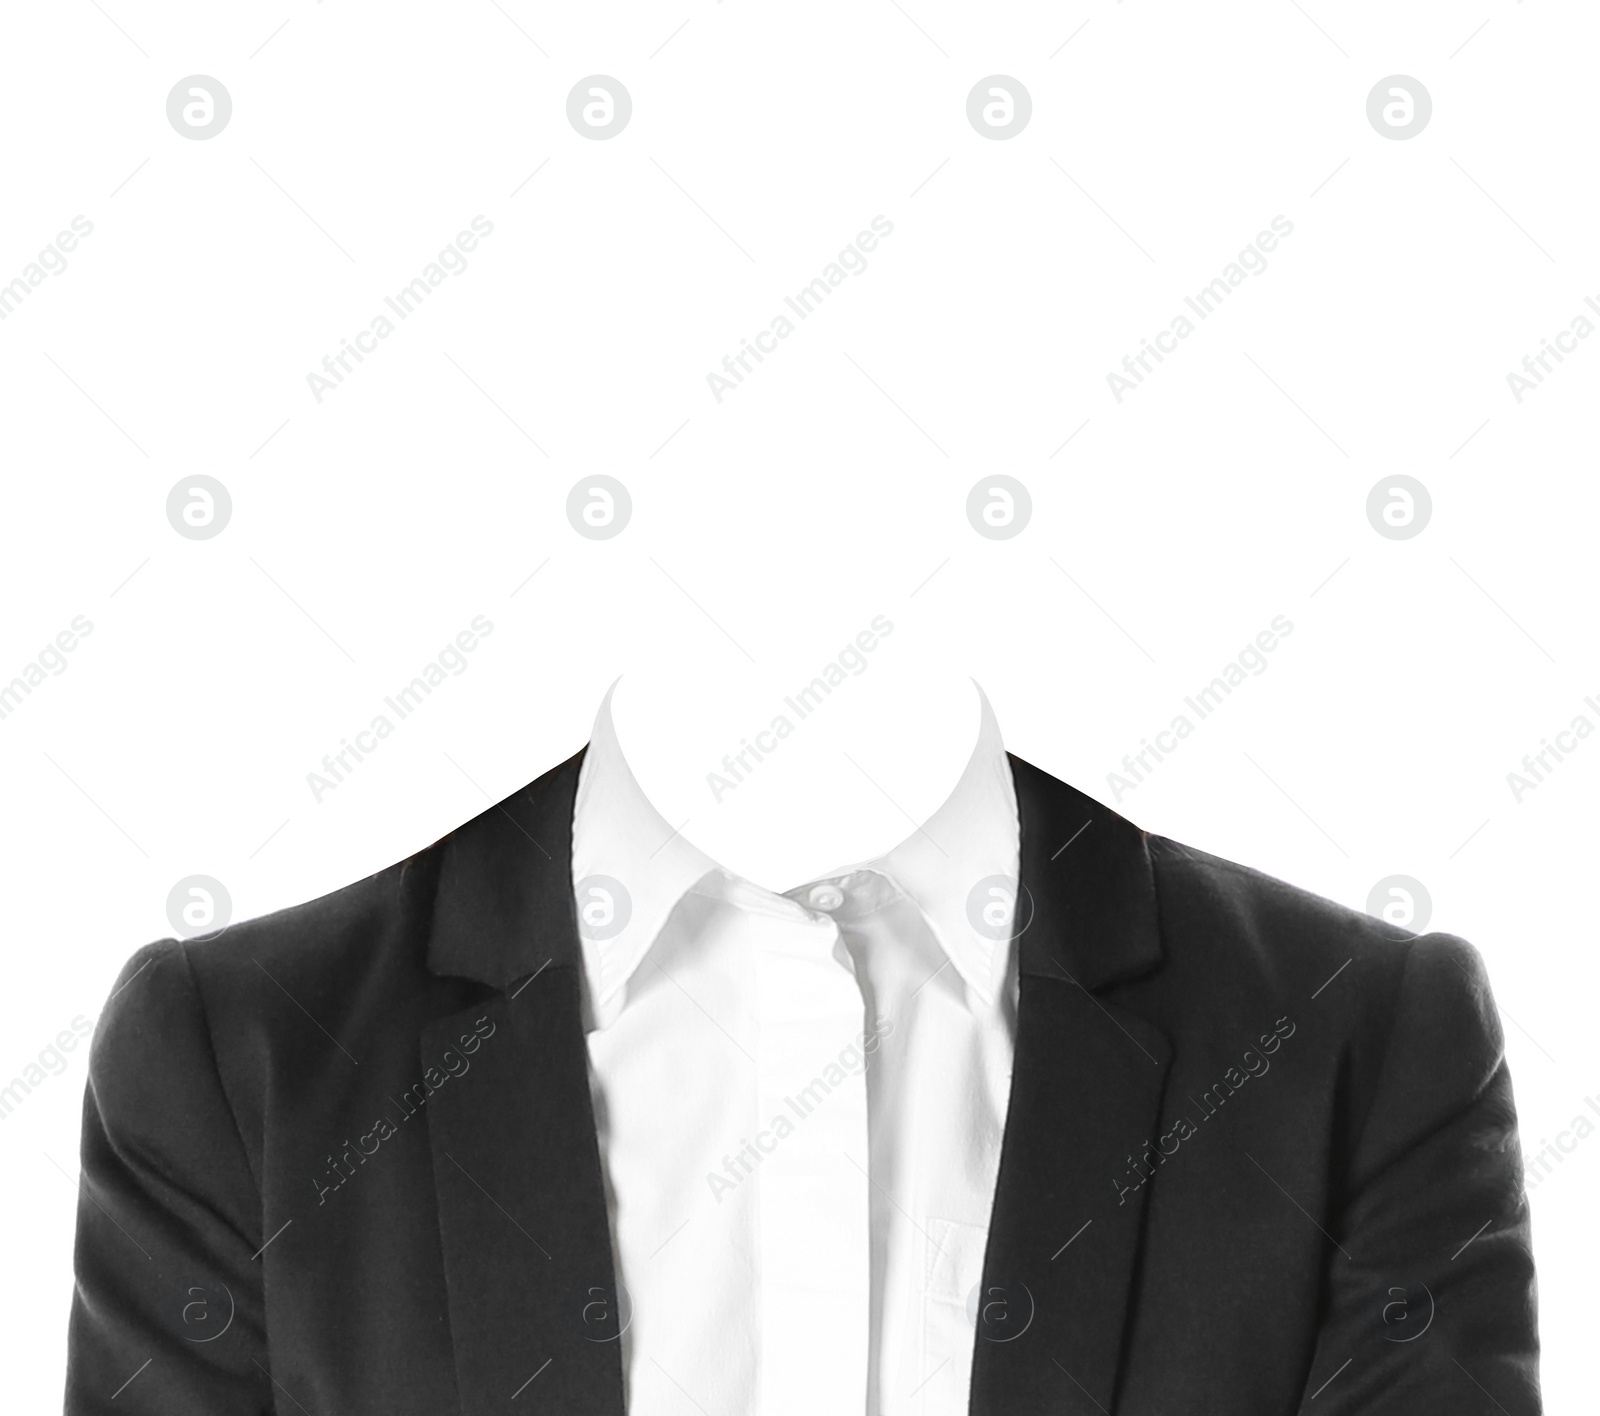 Image of Formal wear replacement template for passport photo or other documents. Jacket and shirt isolated on white